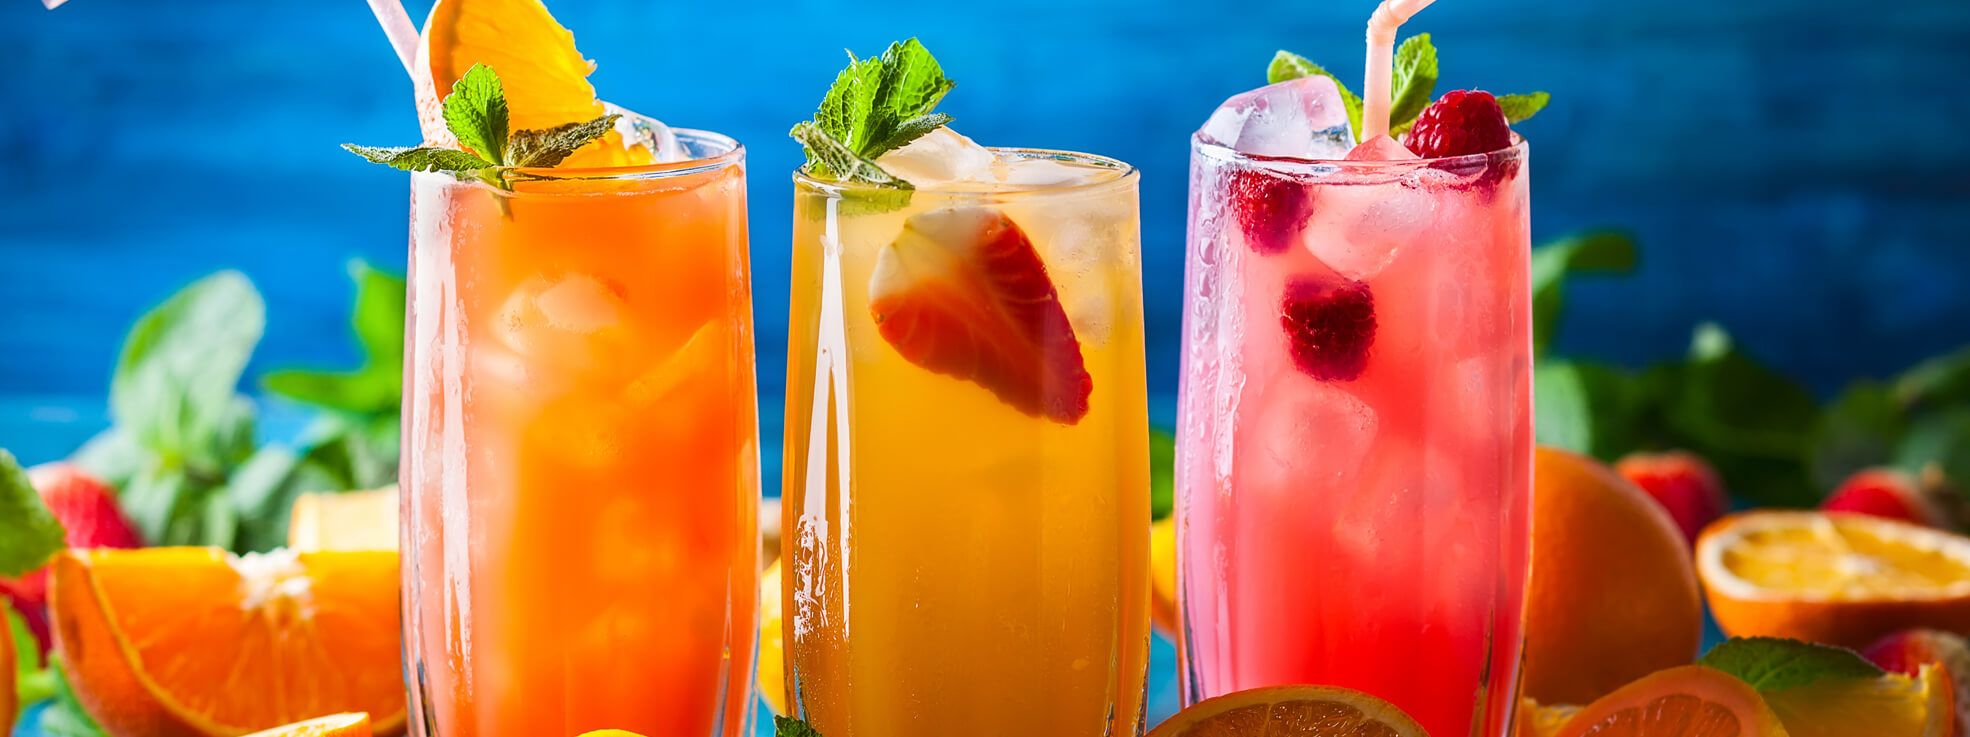 7 Best Drinks That You Can Make At Home In Summer